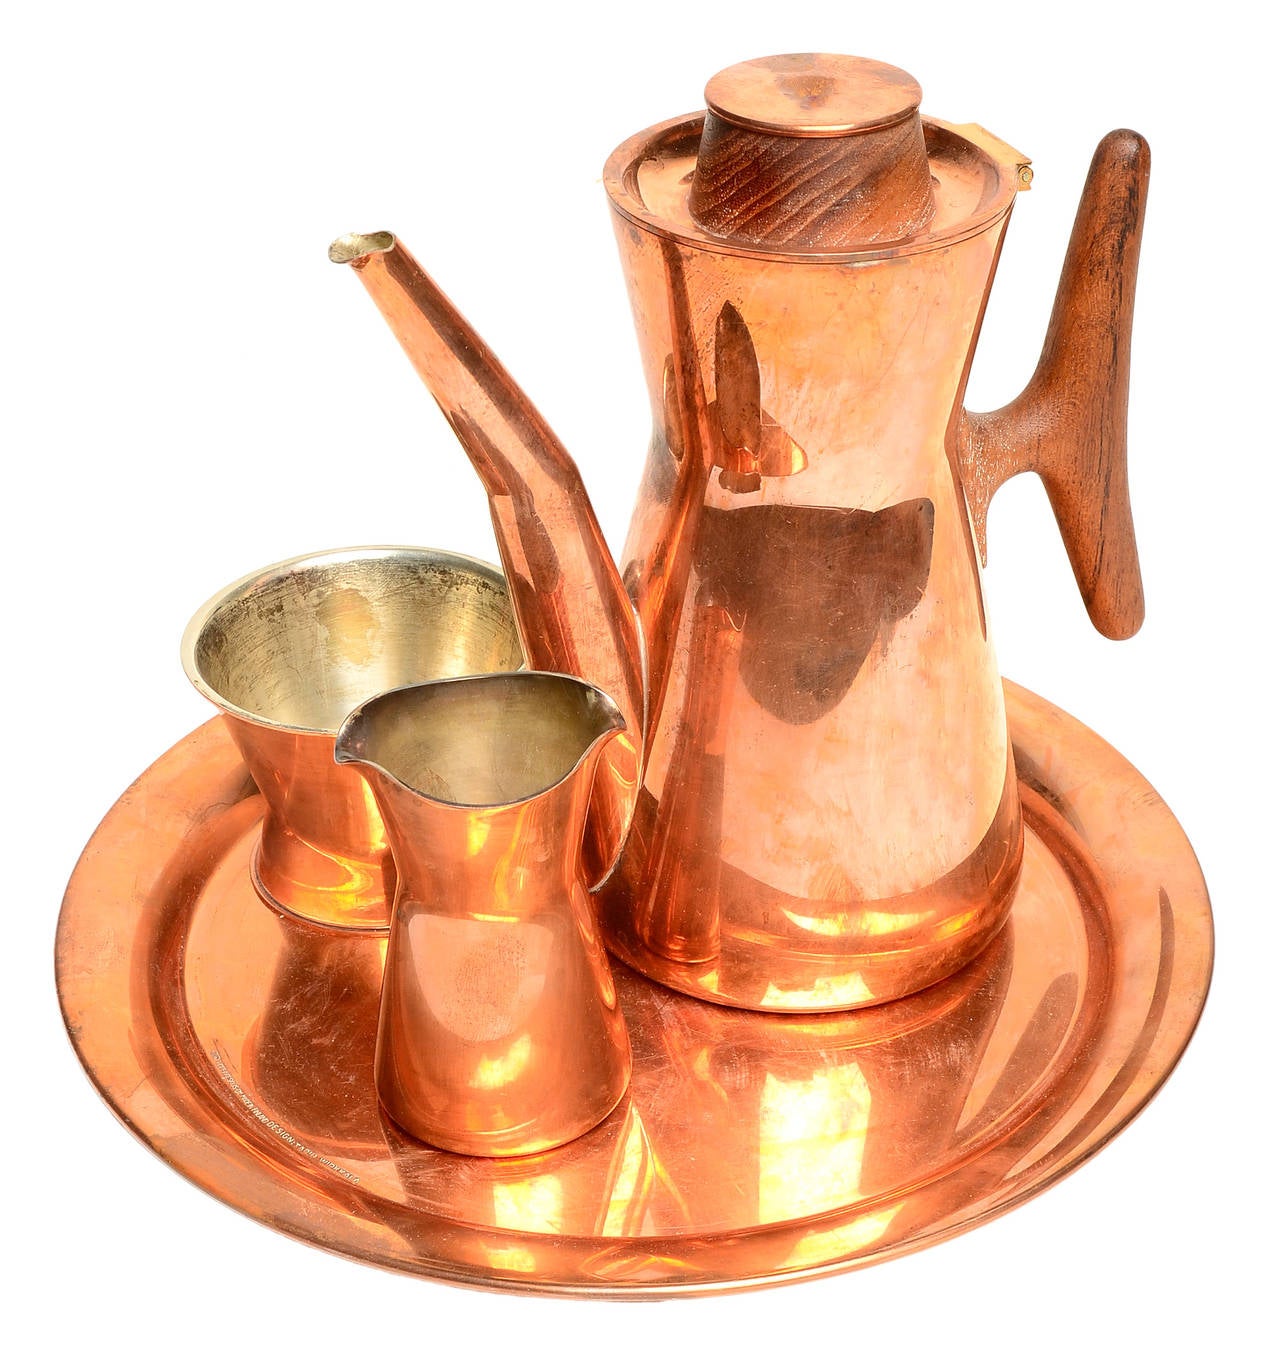 A solid copper coffee set including coffee pot, creamer, sugar pot, and very hard to find solid copper serving tray.
Lined in silver, these sets were produced in very limited numbers . Hand made to order, these are very rare .
This is the large